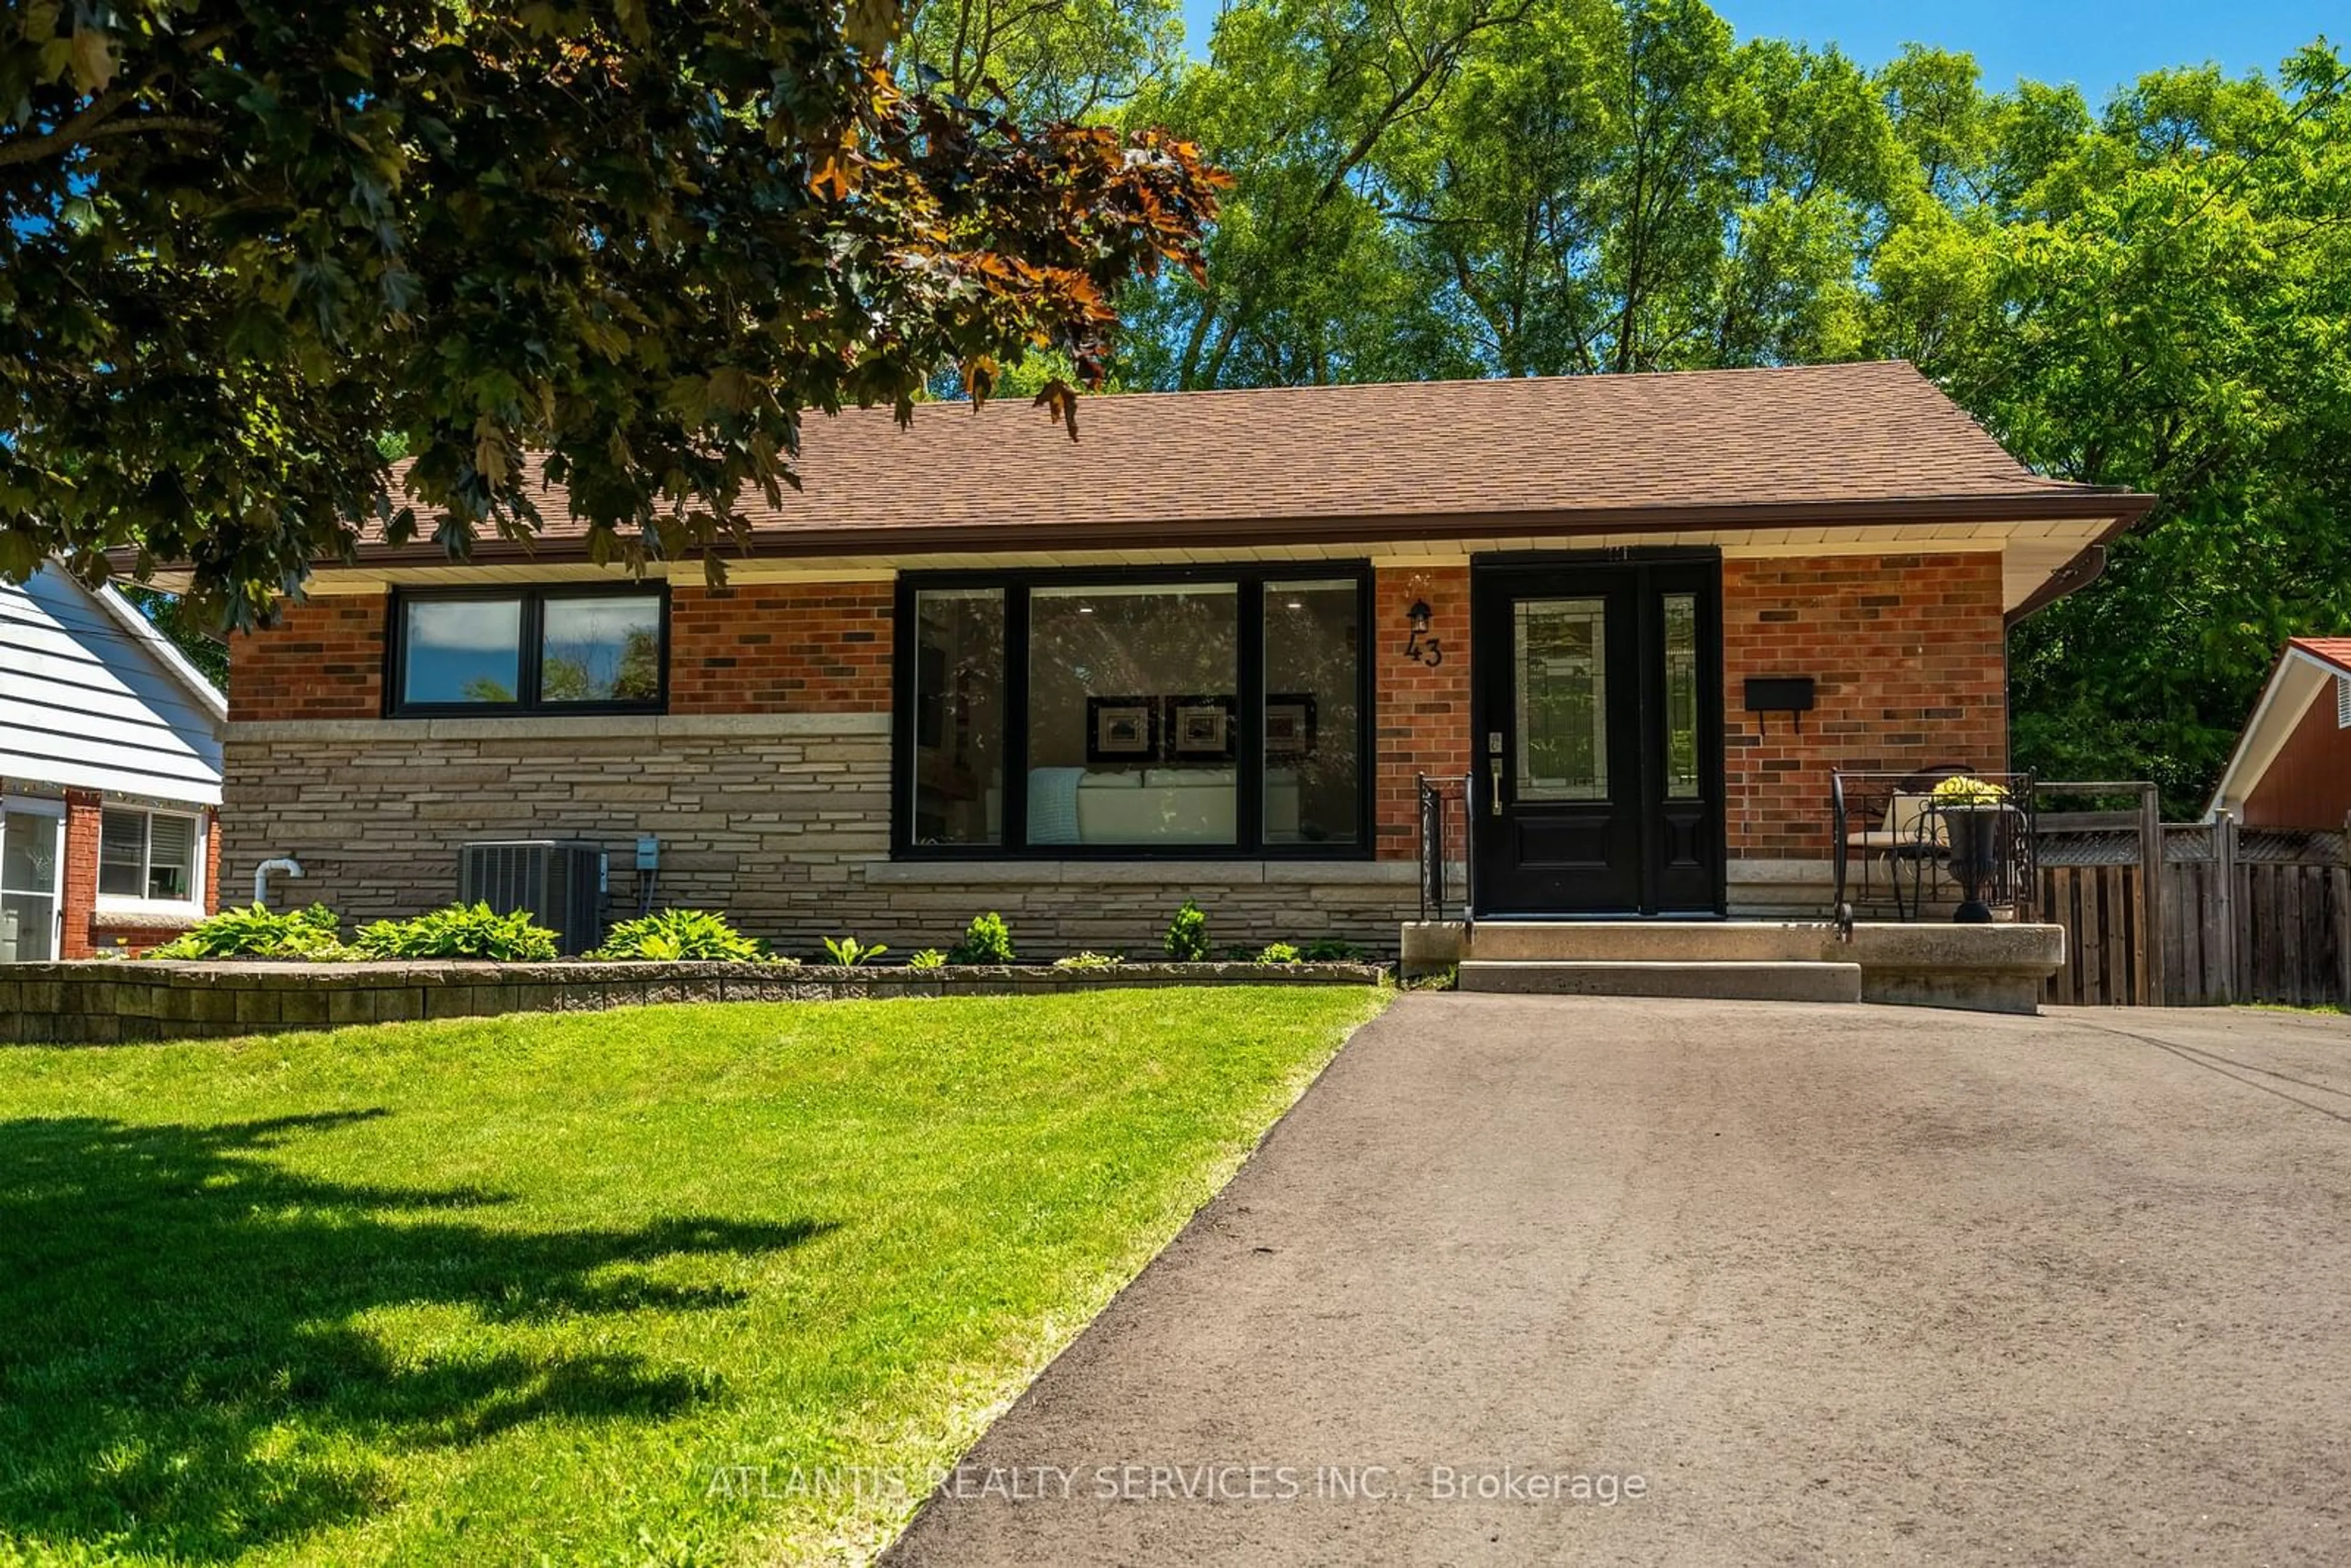 Home with brick exterior material for 43 Battlefield Dr, Hamilton Ontario L8G 1V1